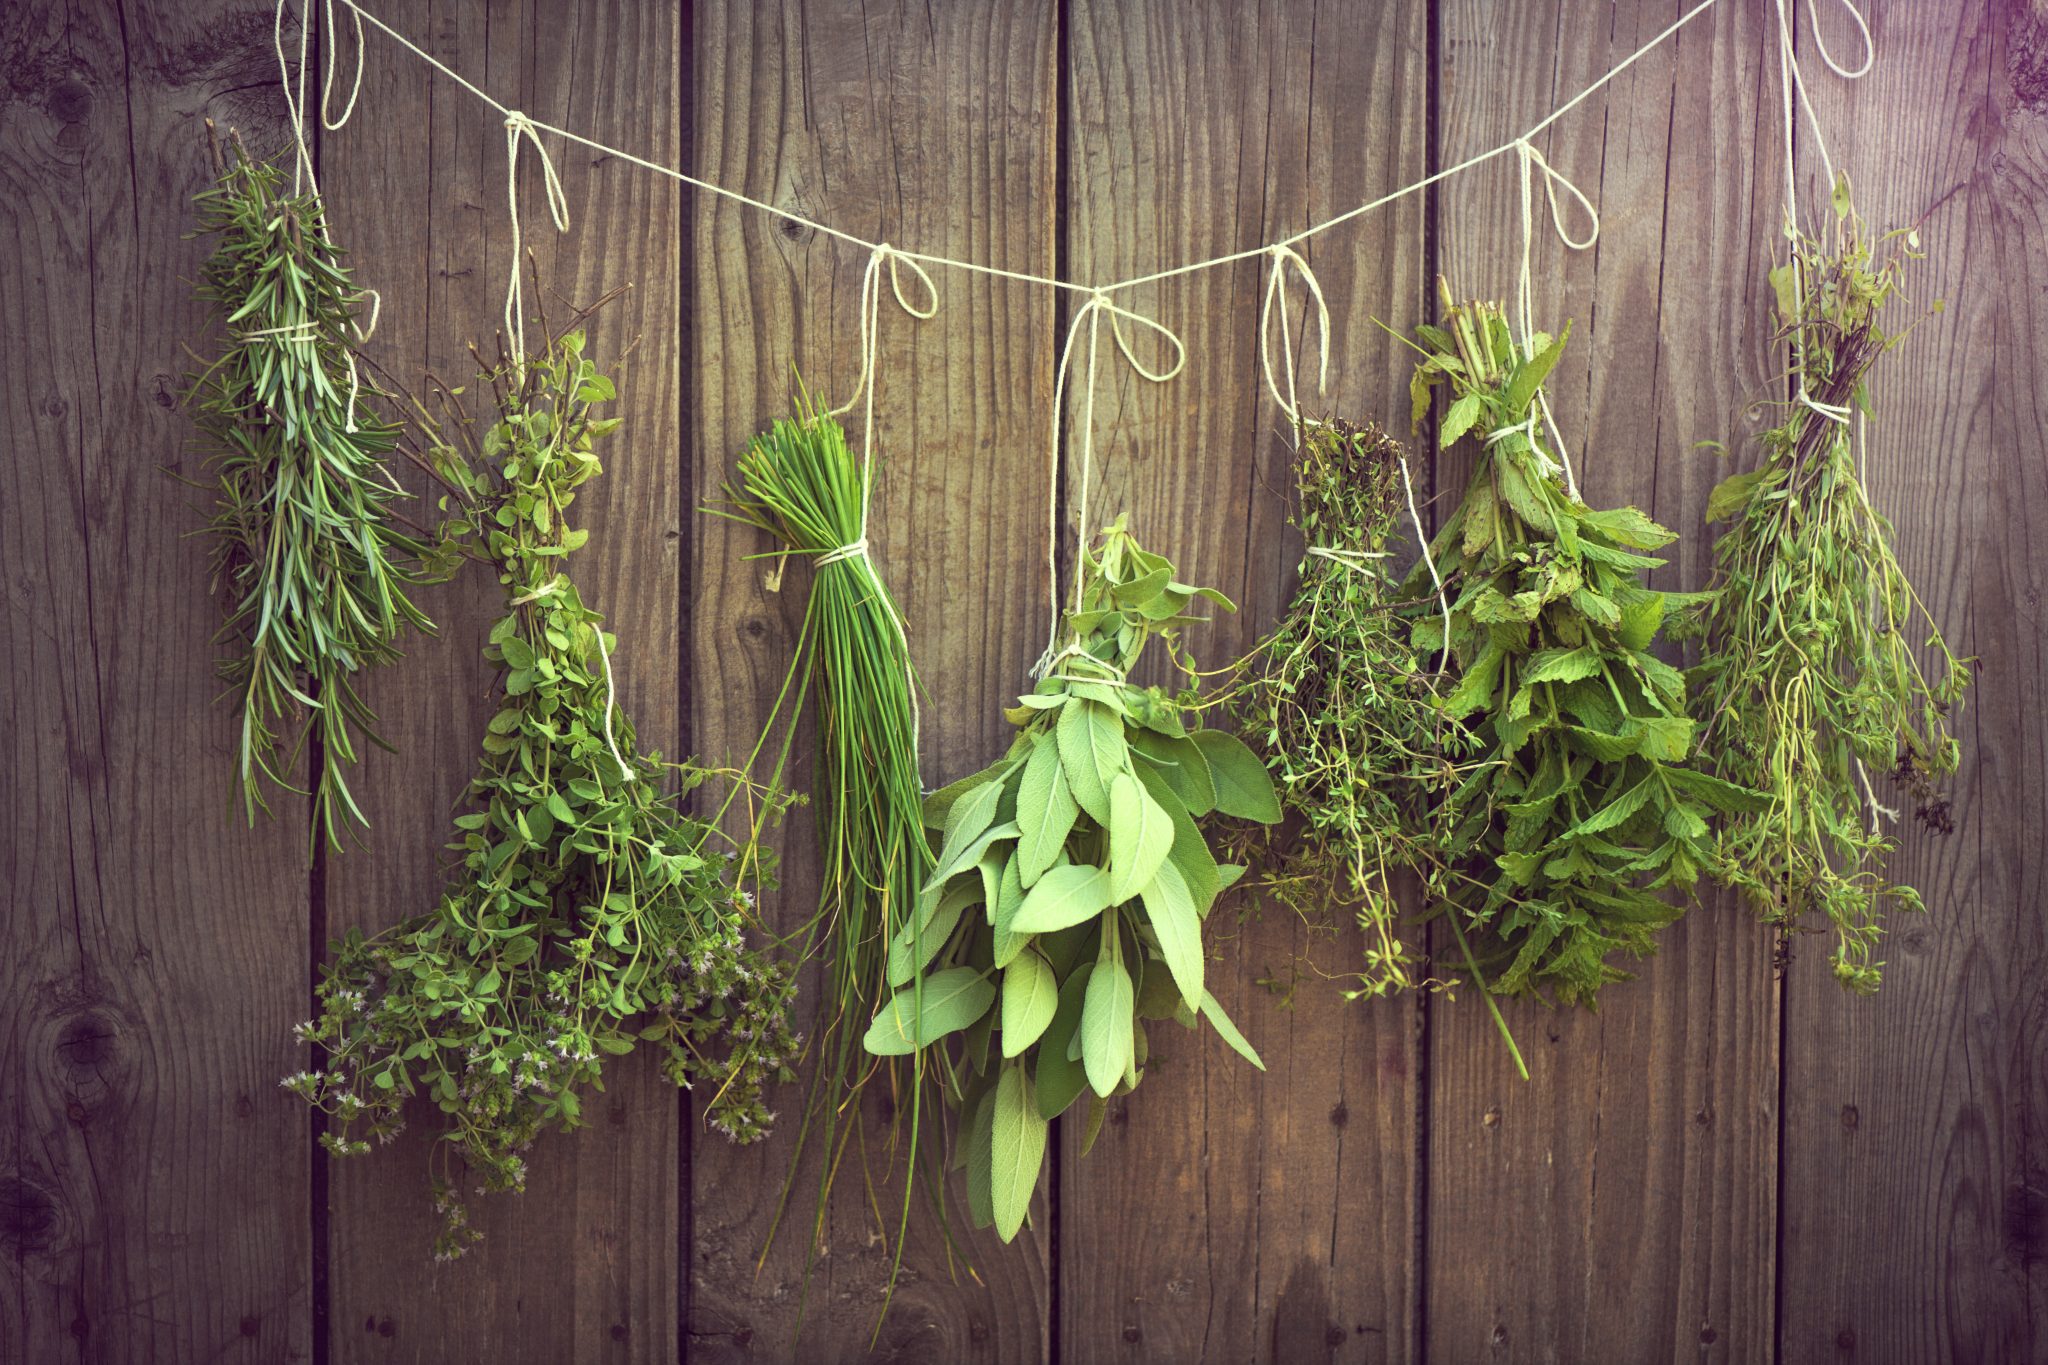 Herb bunches hanging on rope against wooden fence